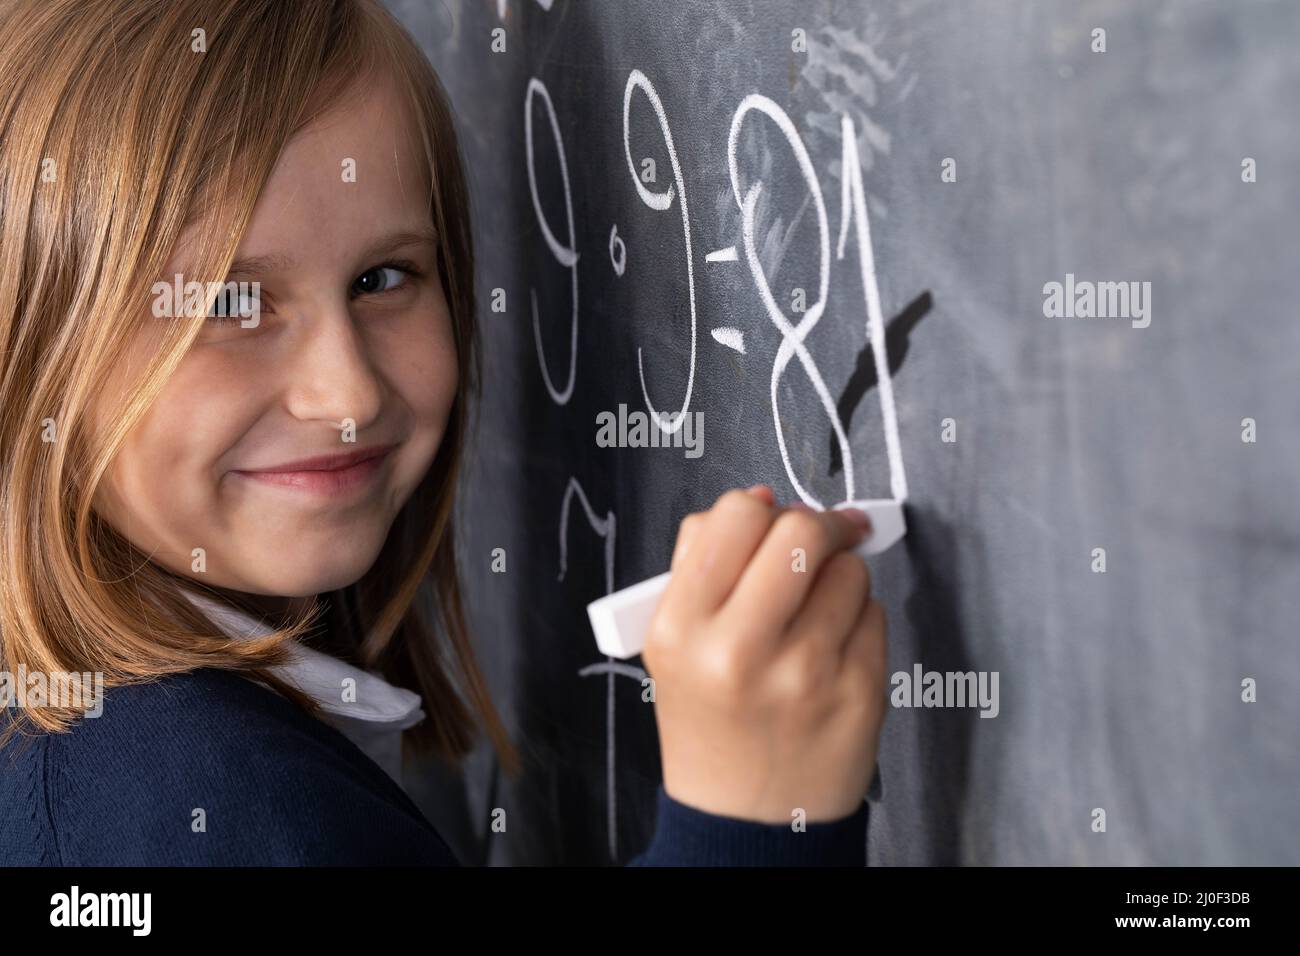 The student solves a math problem standing at the blackboard in her classroom. Stock Photo